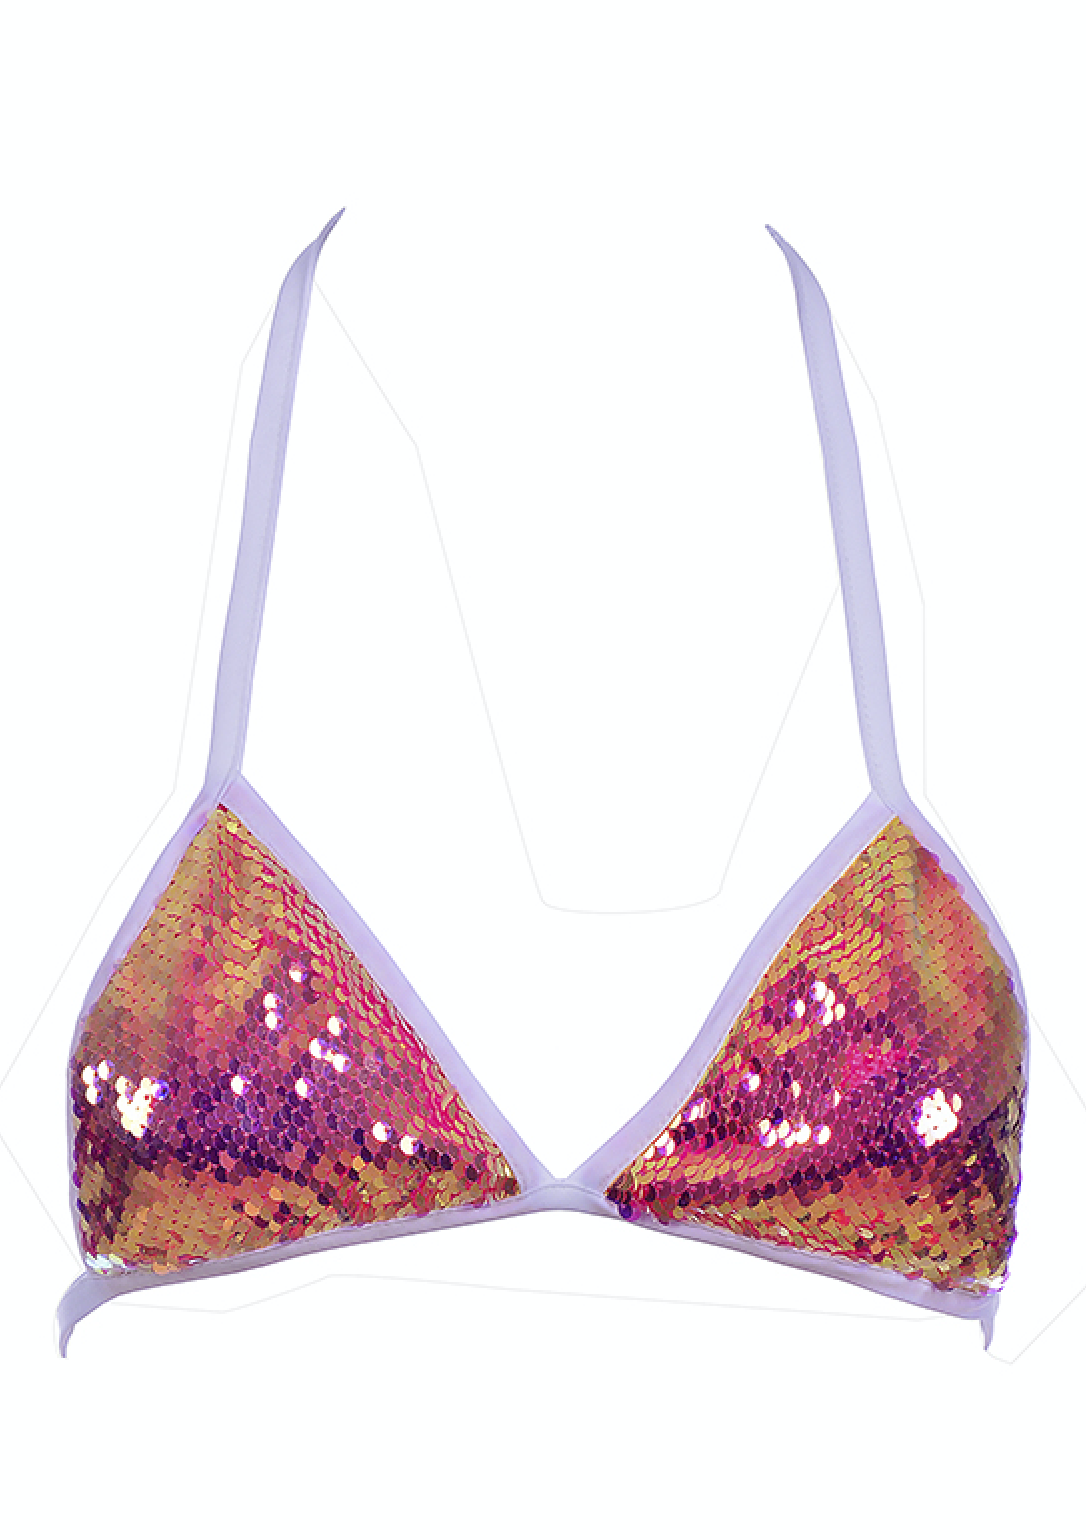 Passion Fruit Sequin Triangle Top